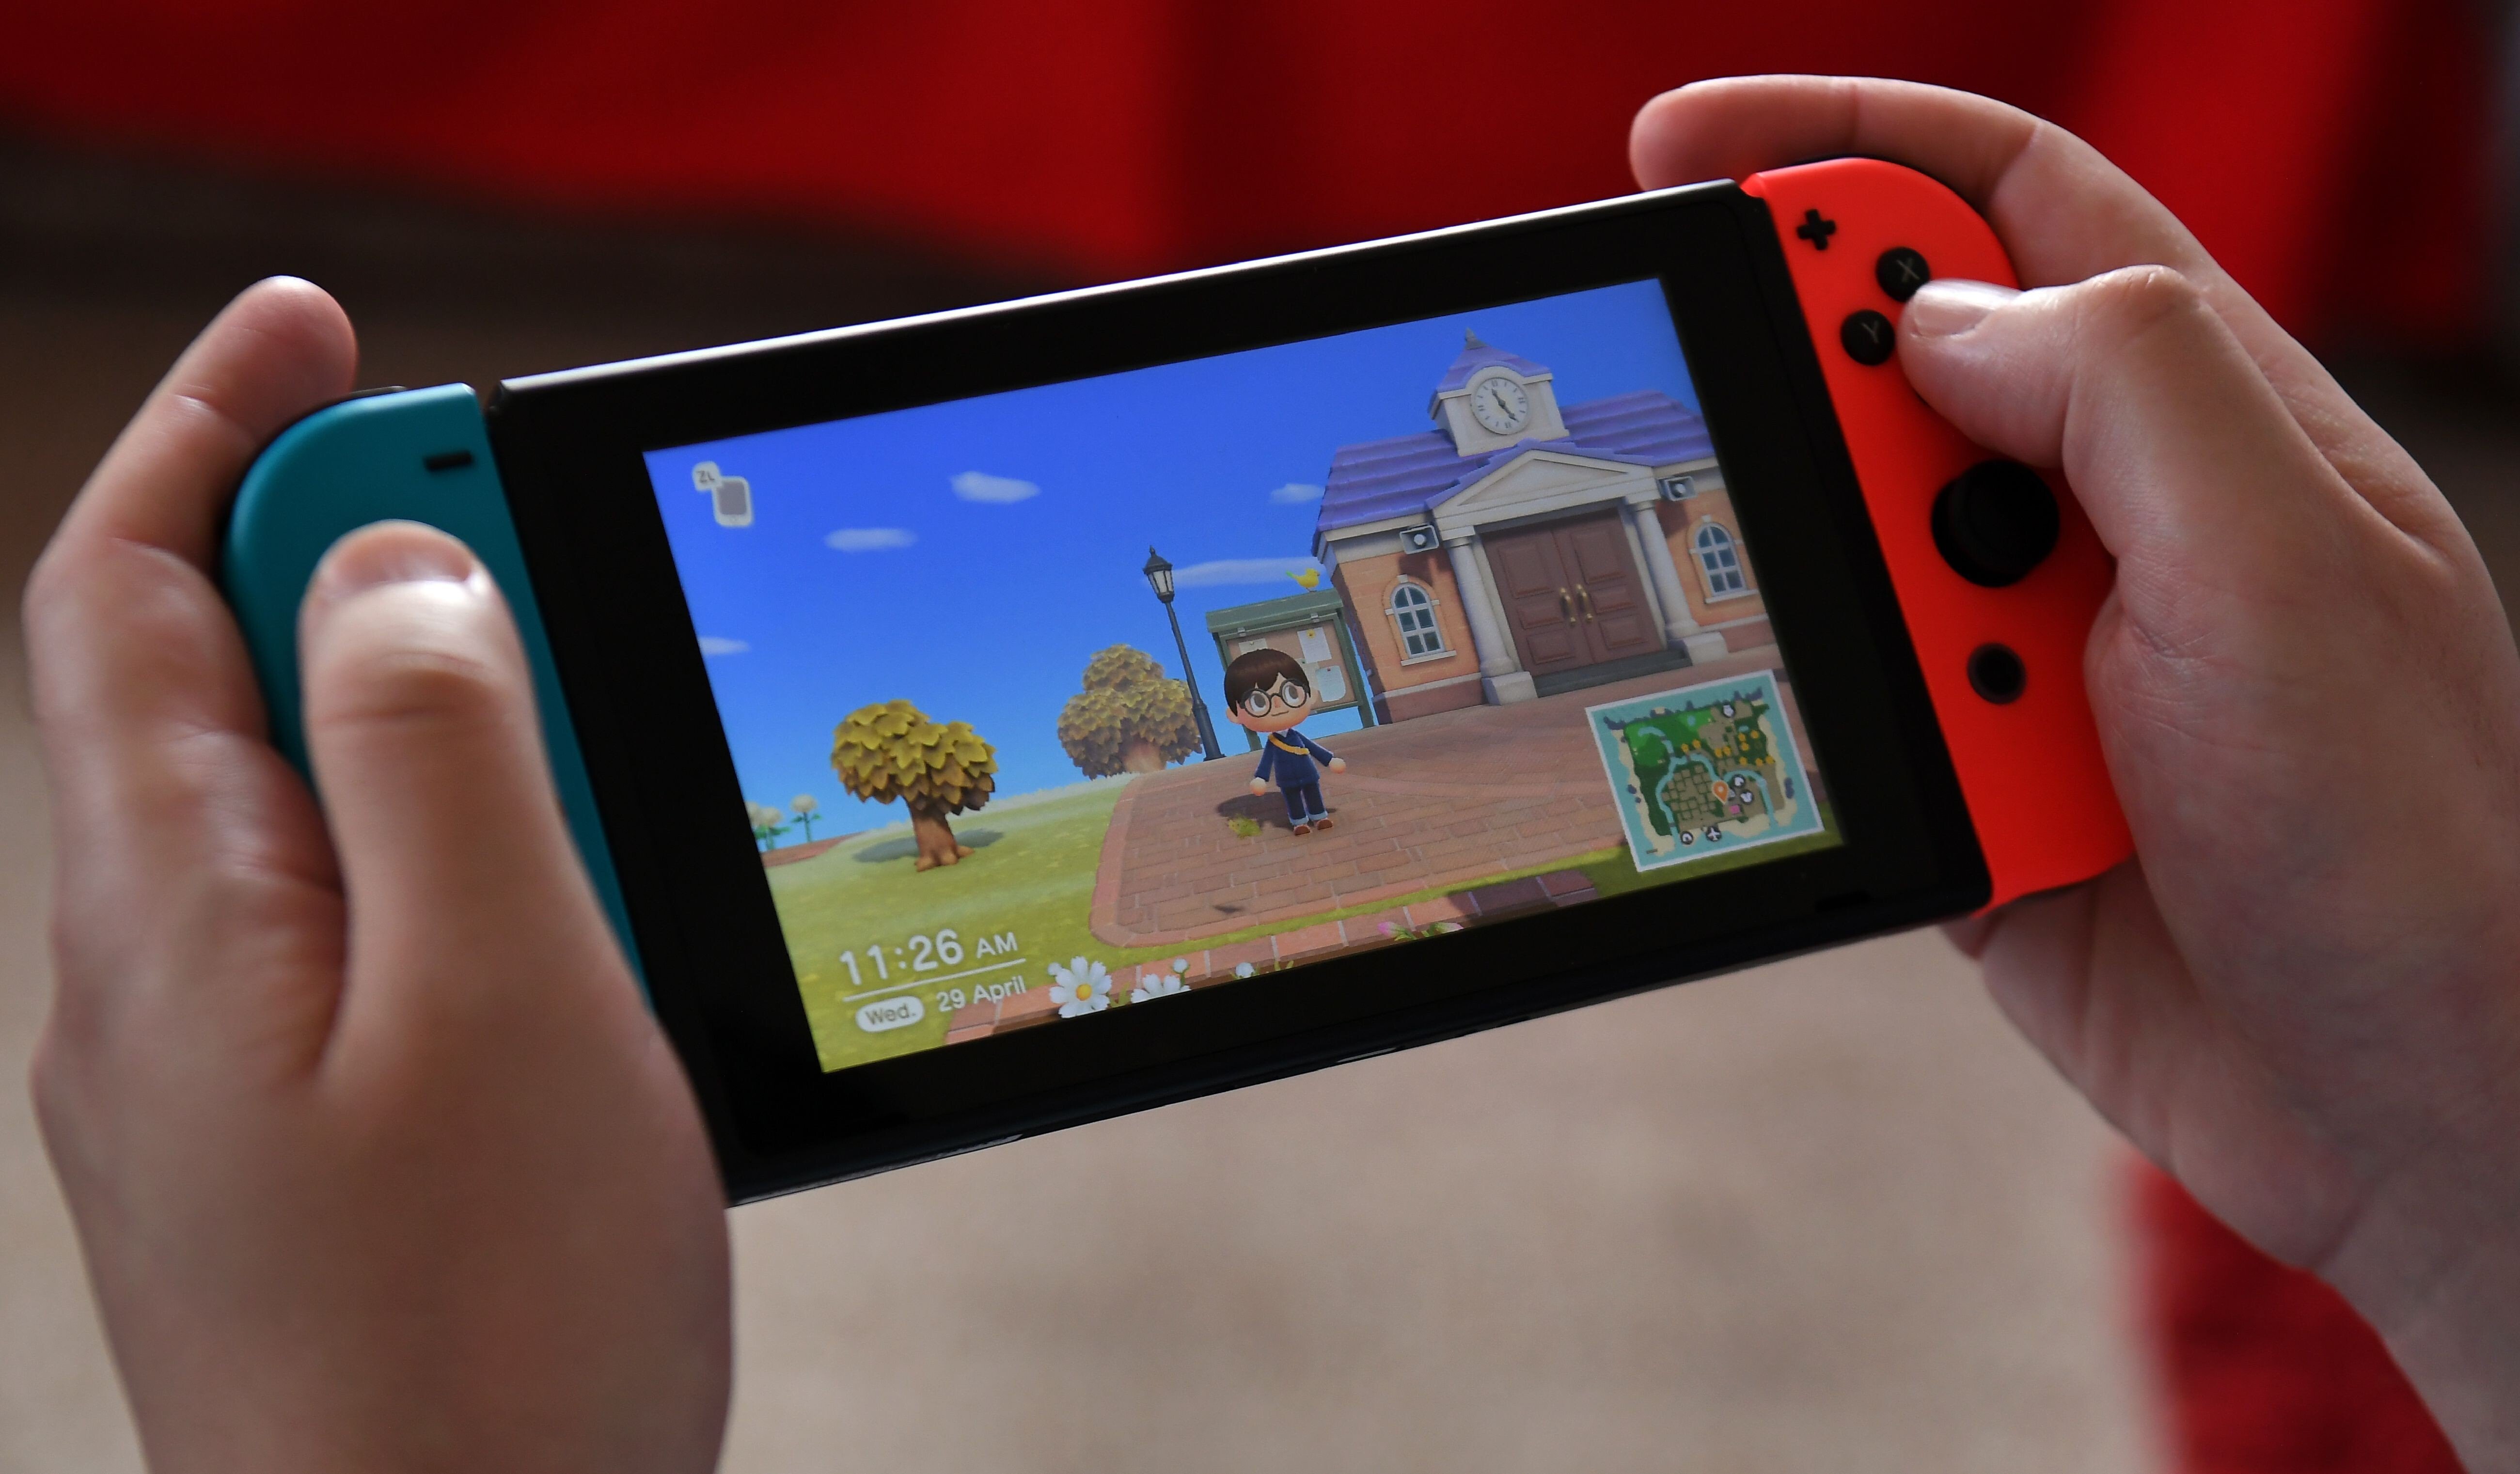 Nintendo’s Animal Crossing: New Horizons became a hit in 2020 while people were stuck at home during the pandemic, but as the video gaming boom has worn off, the company’s profits have fallen. Photo: AFP